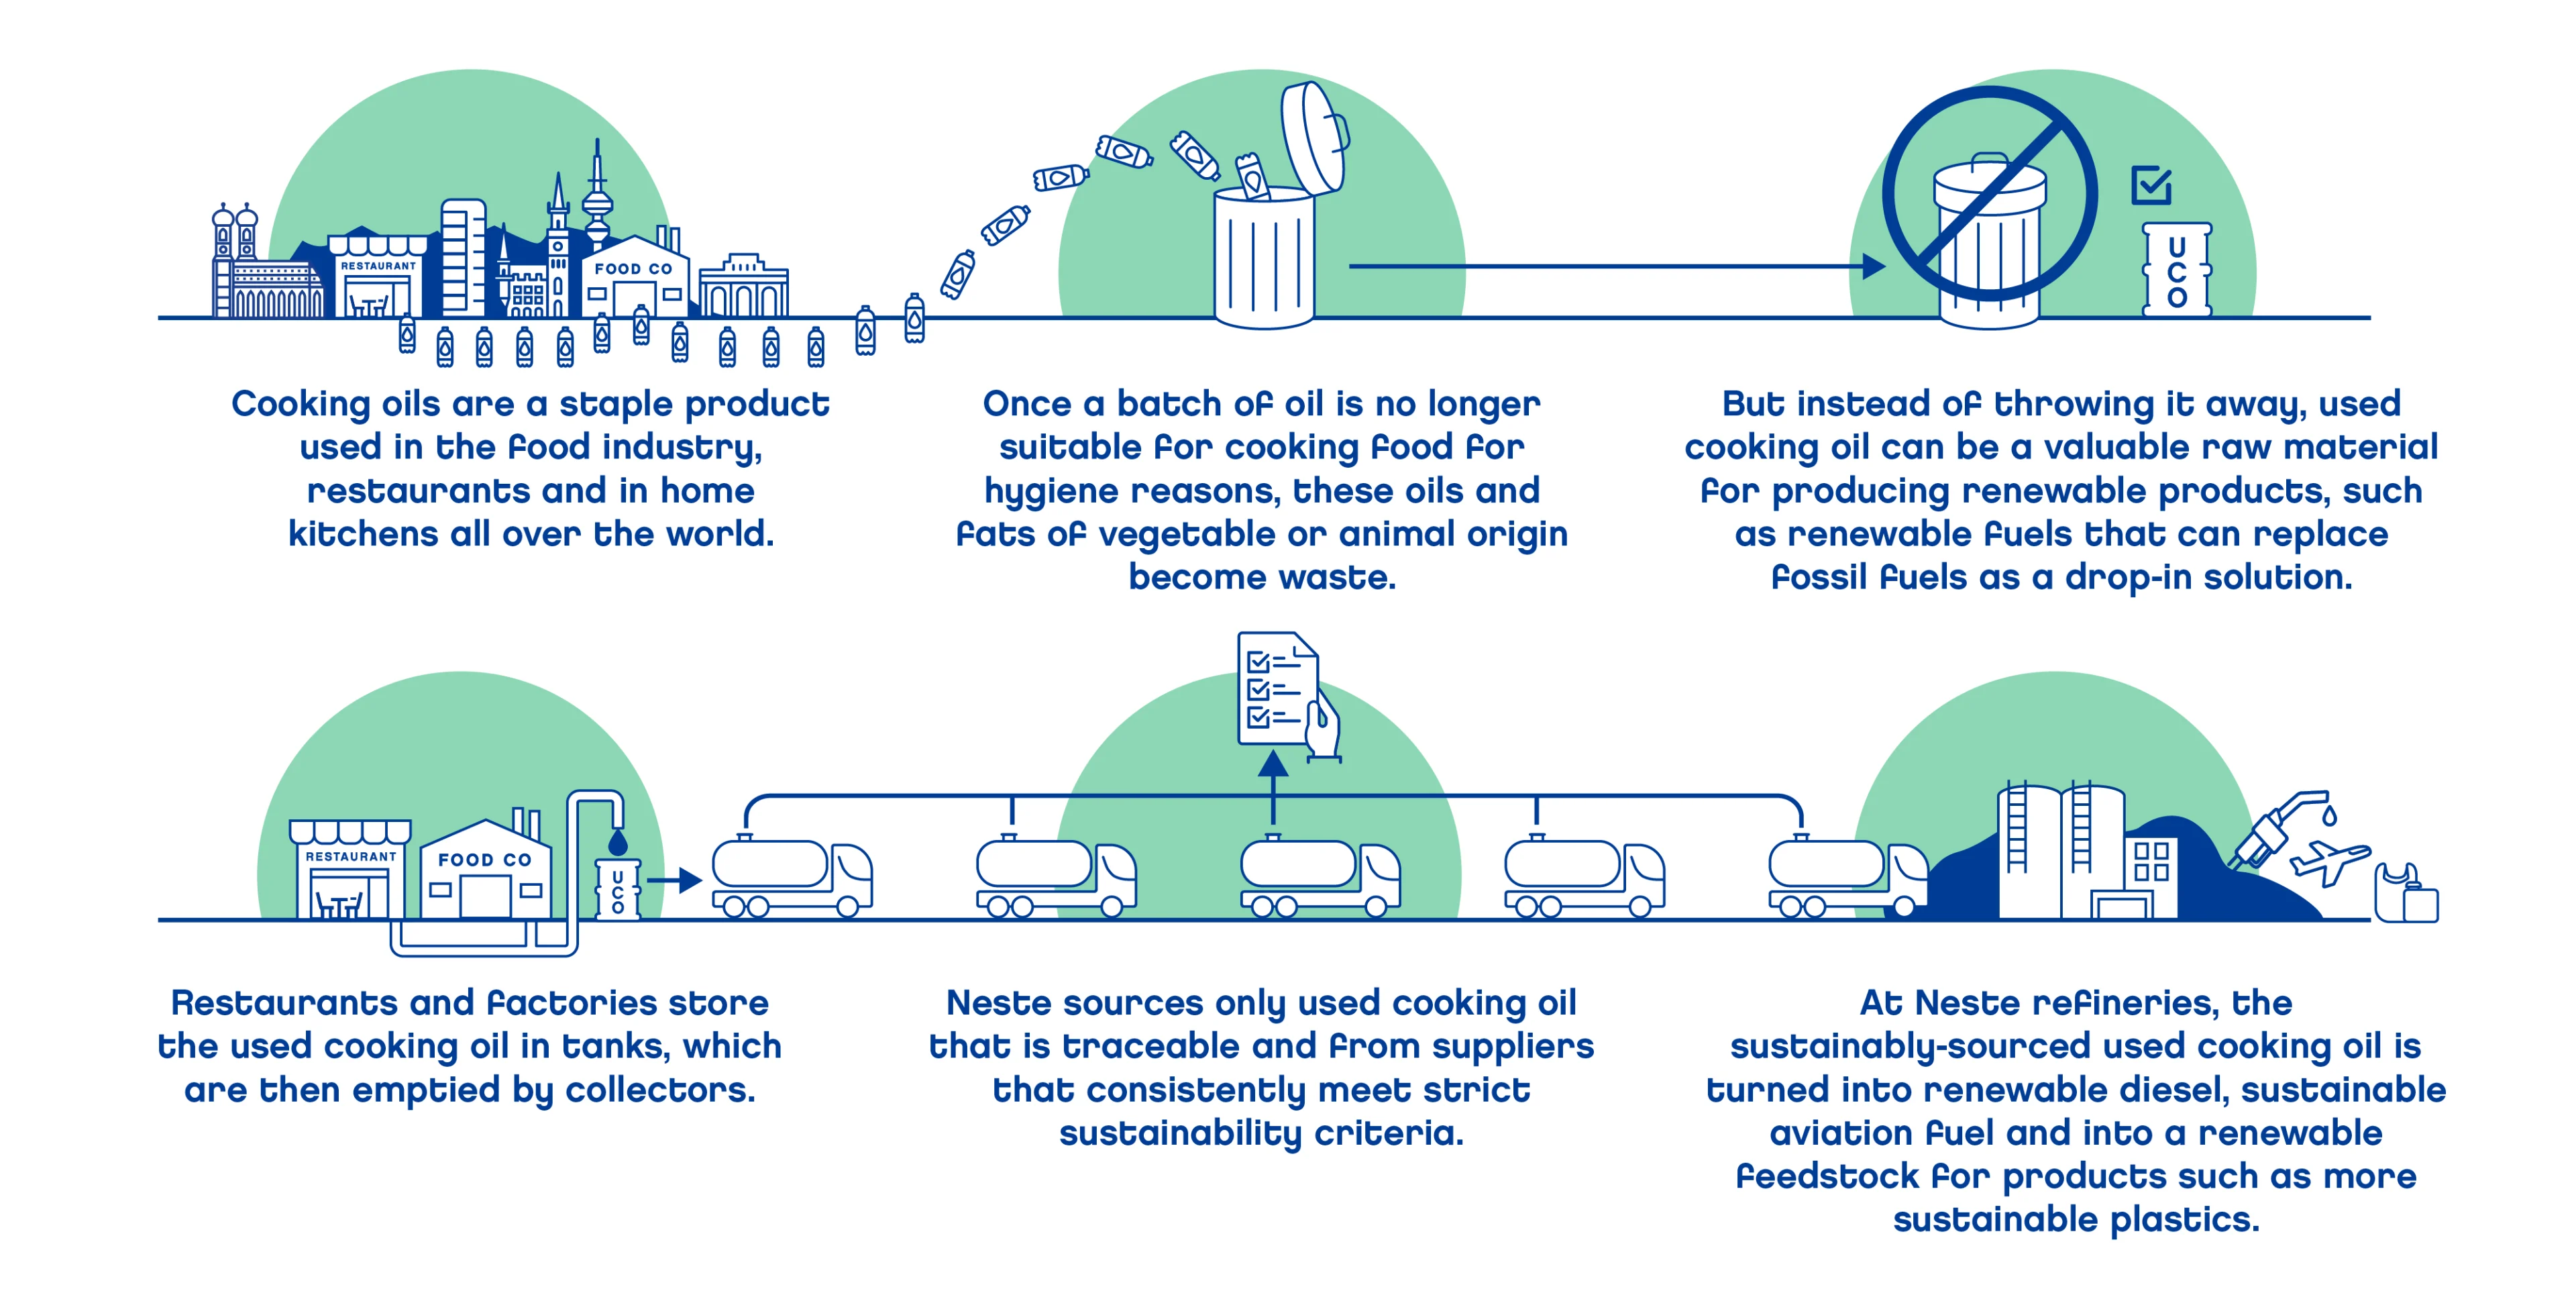 Infographic of how used cooking oils can be turned into valuable raw material for producing renewable products.